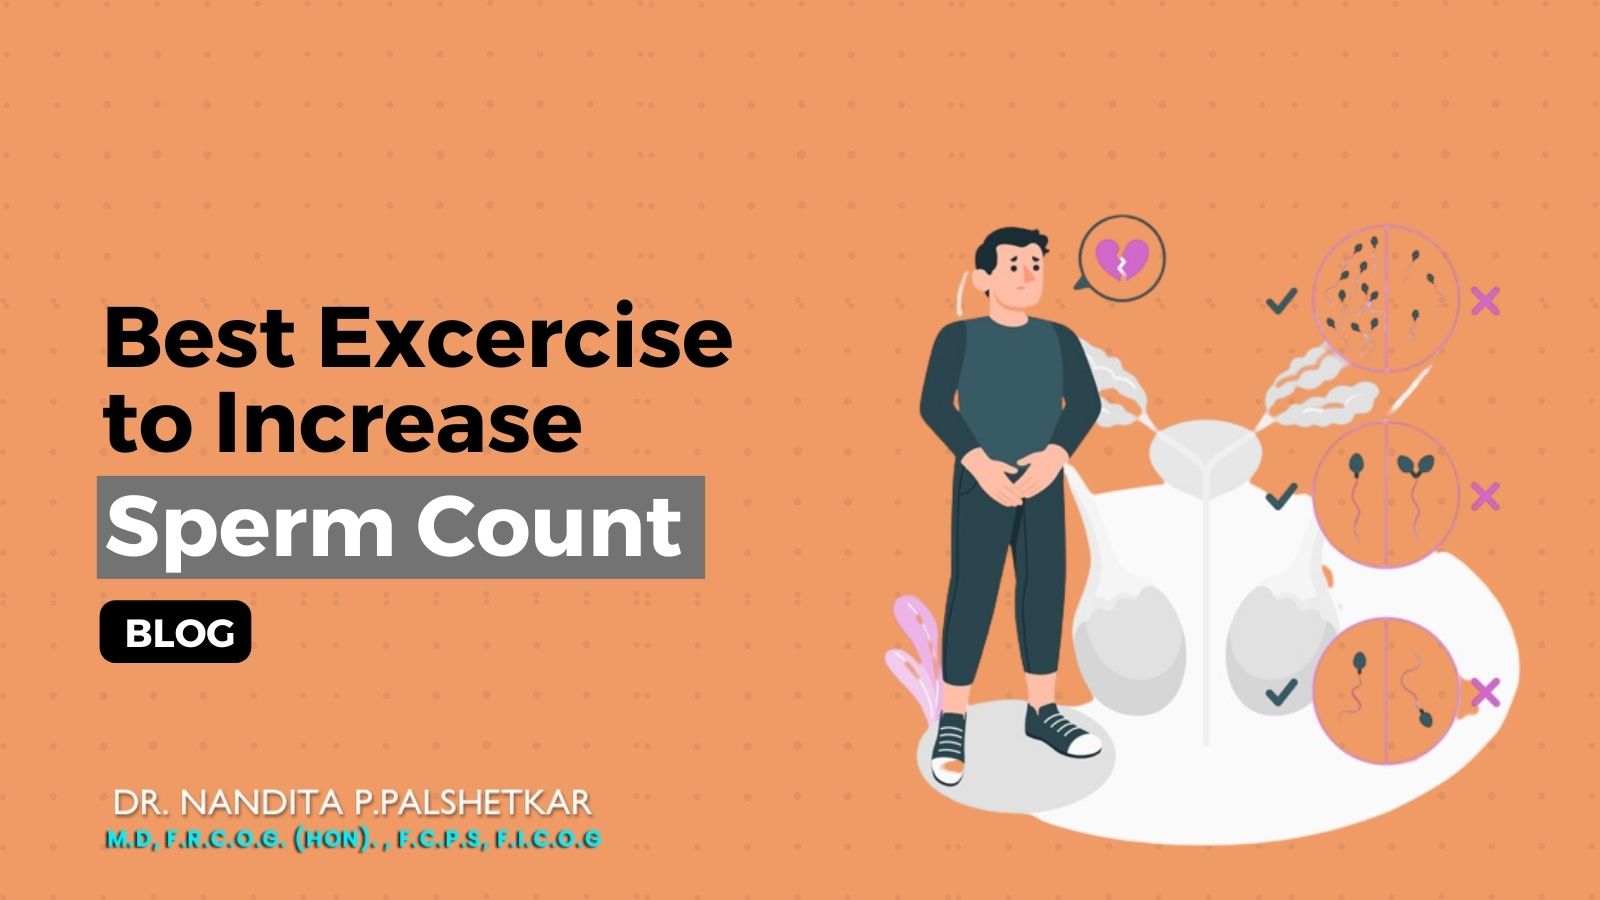 Best Exercises to Increase Sperm Count and Improve Male Fertility